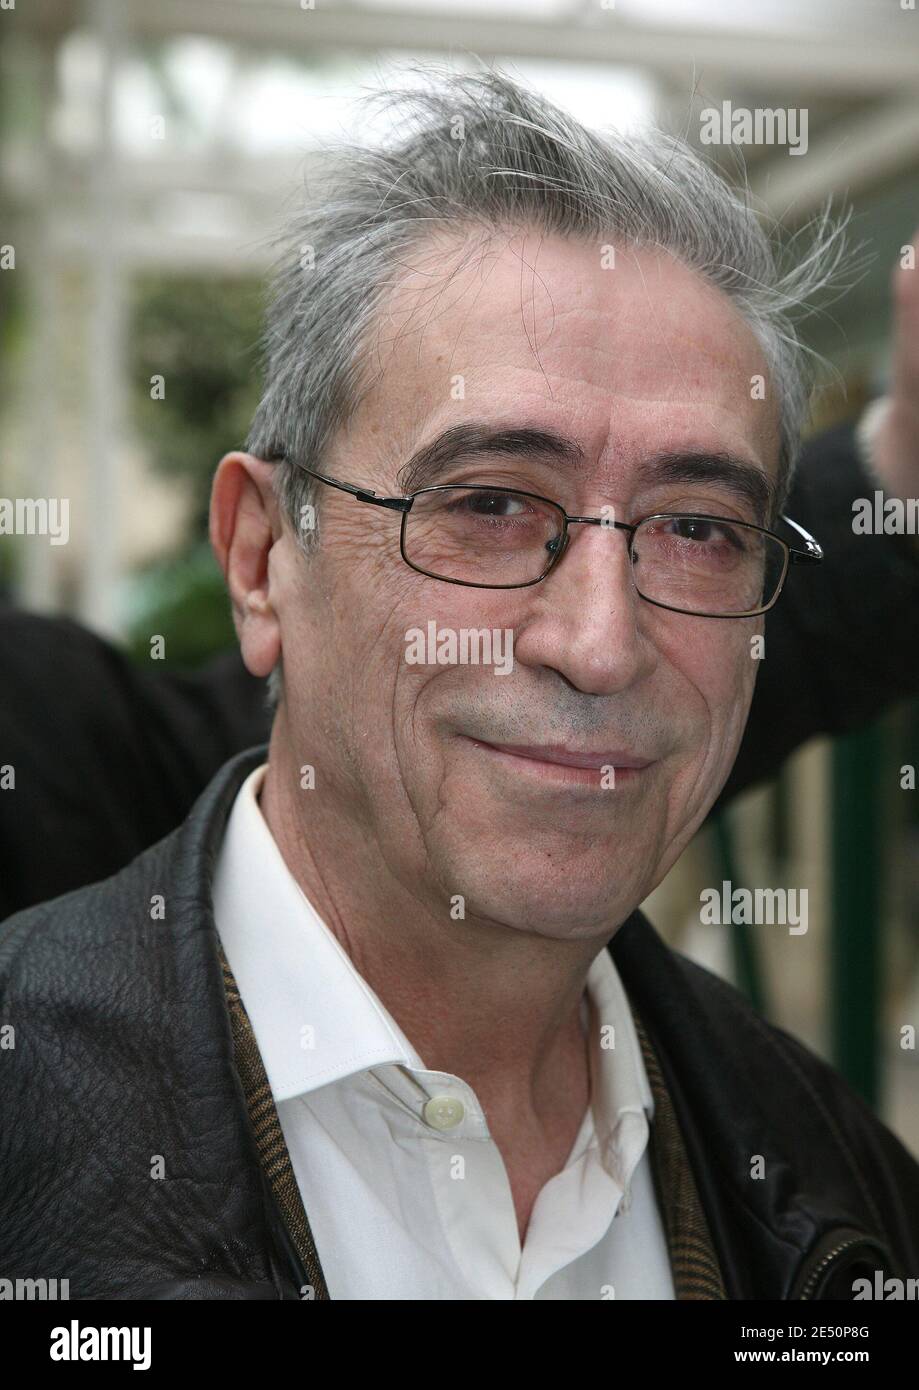 EXCLUSIVE - Actor Luis Rego arrives at the taping of the TV Show Vivement Dimanche held at Studio Gabriel in Paris, France on April 2, 2008. Photo by Denis Guignebourg/ABACAPRESS.COM Stock Photo